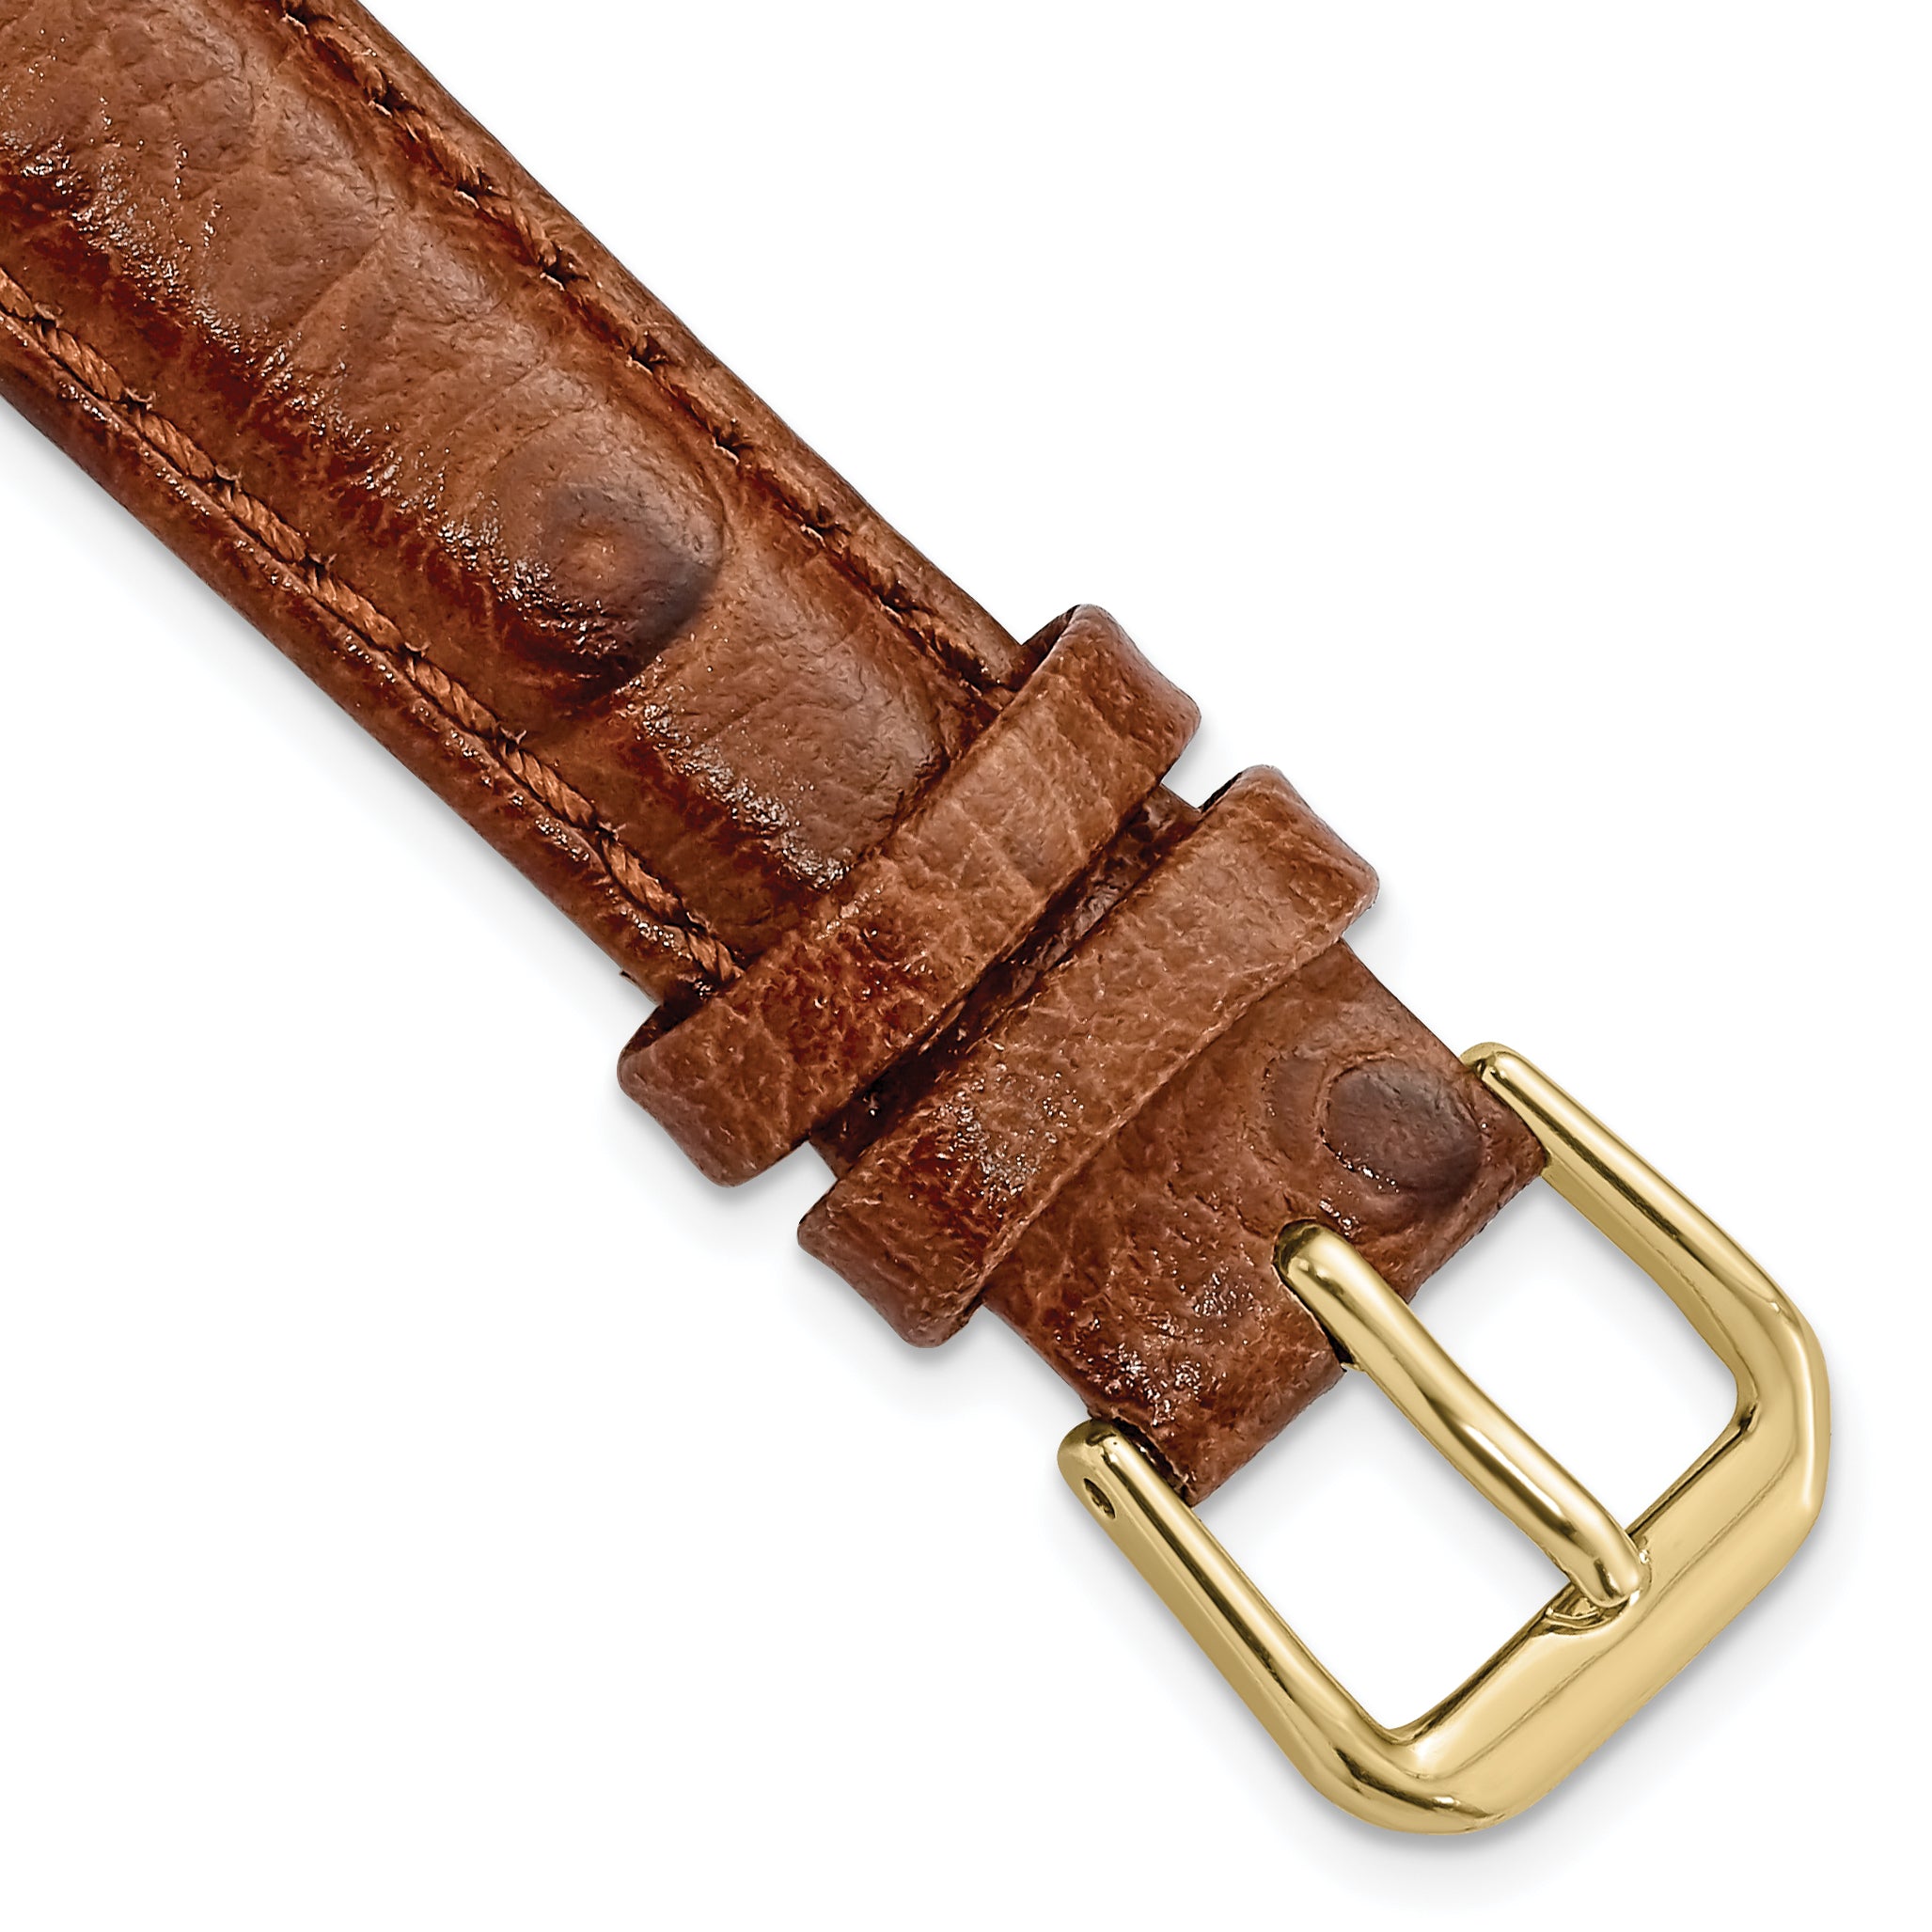 DeBeer 14mm Havana Ostrich Grain Leather with Gold-tone Buckle 6.75 inch Watch Band